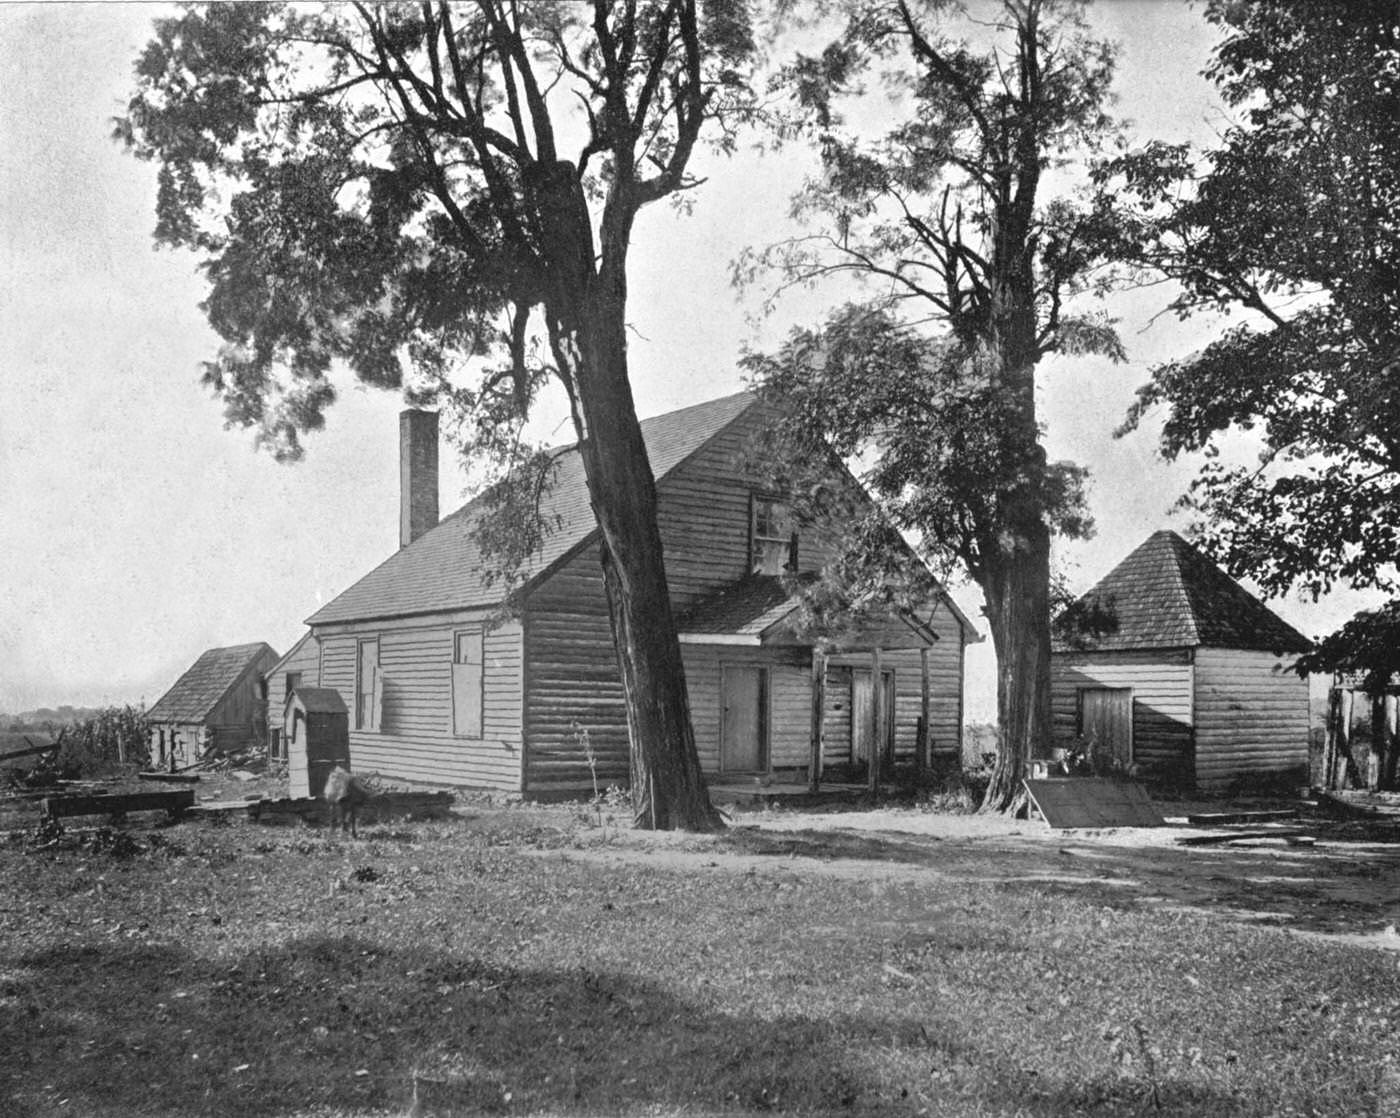 House in which Stonewall Jackson died, Richmond, Virginia, 1900.